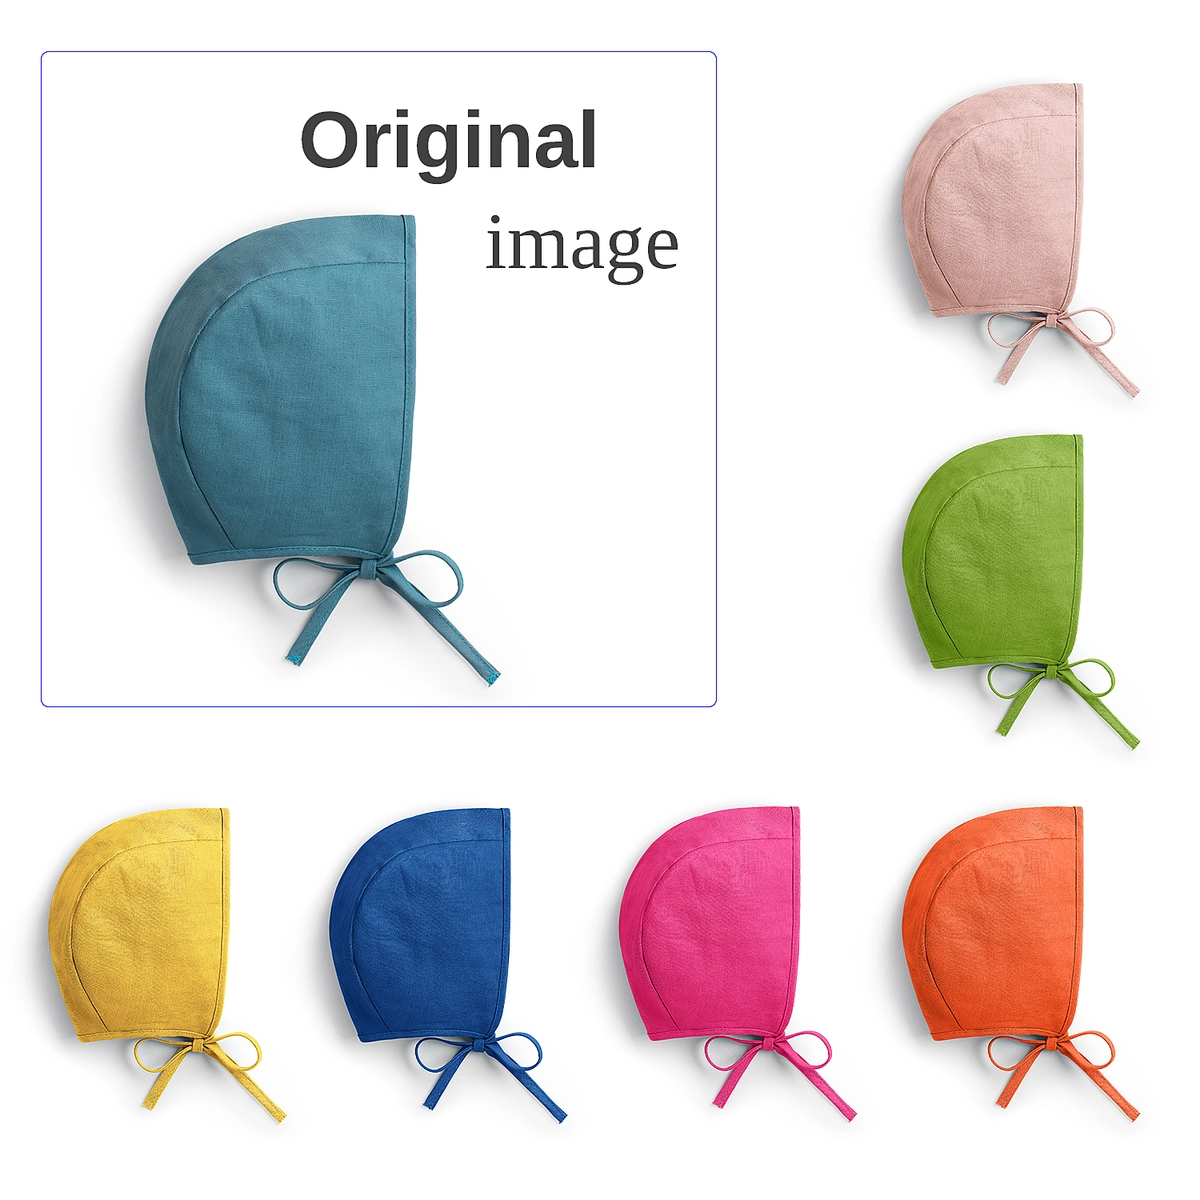 Product Photo Recolor - Καπάκι μωρού